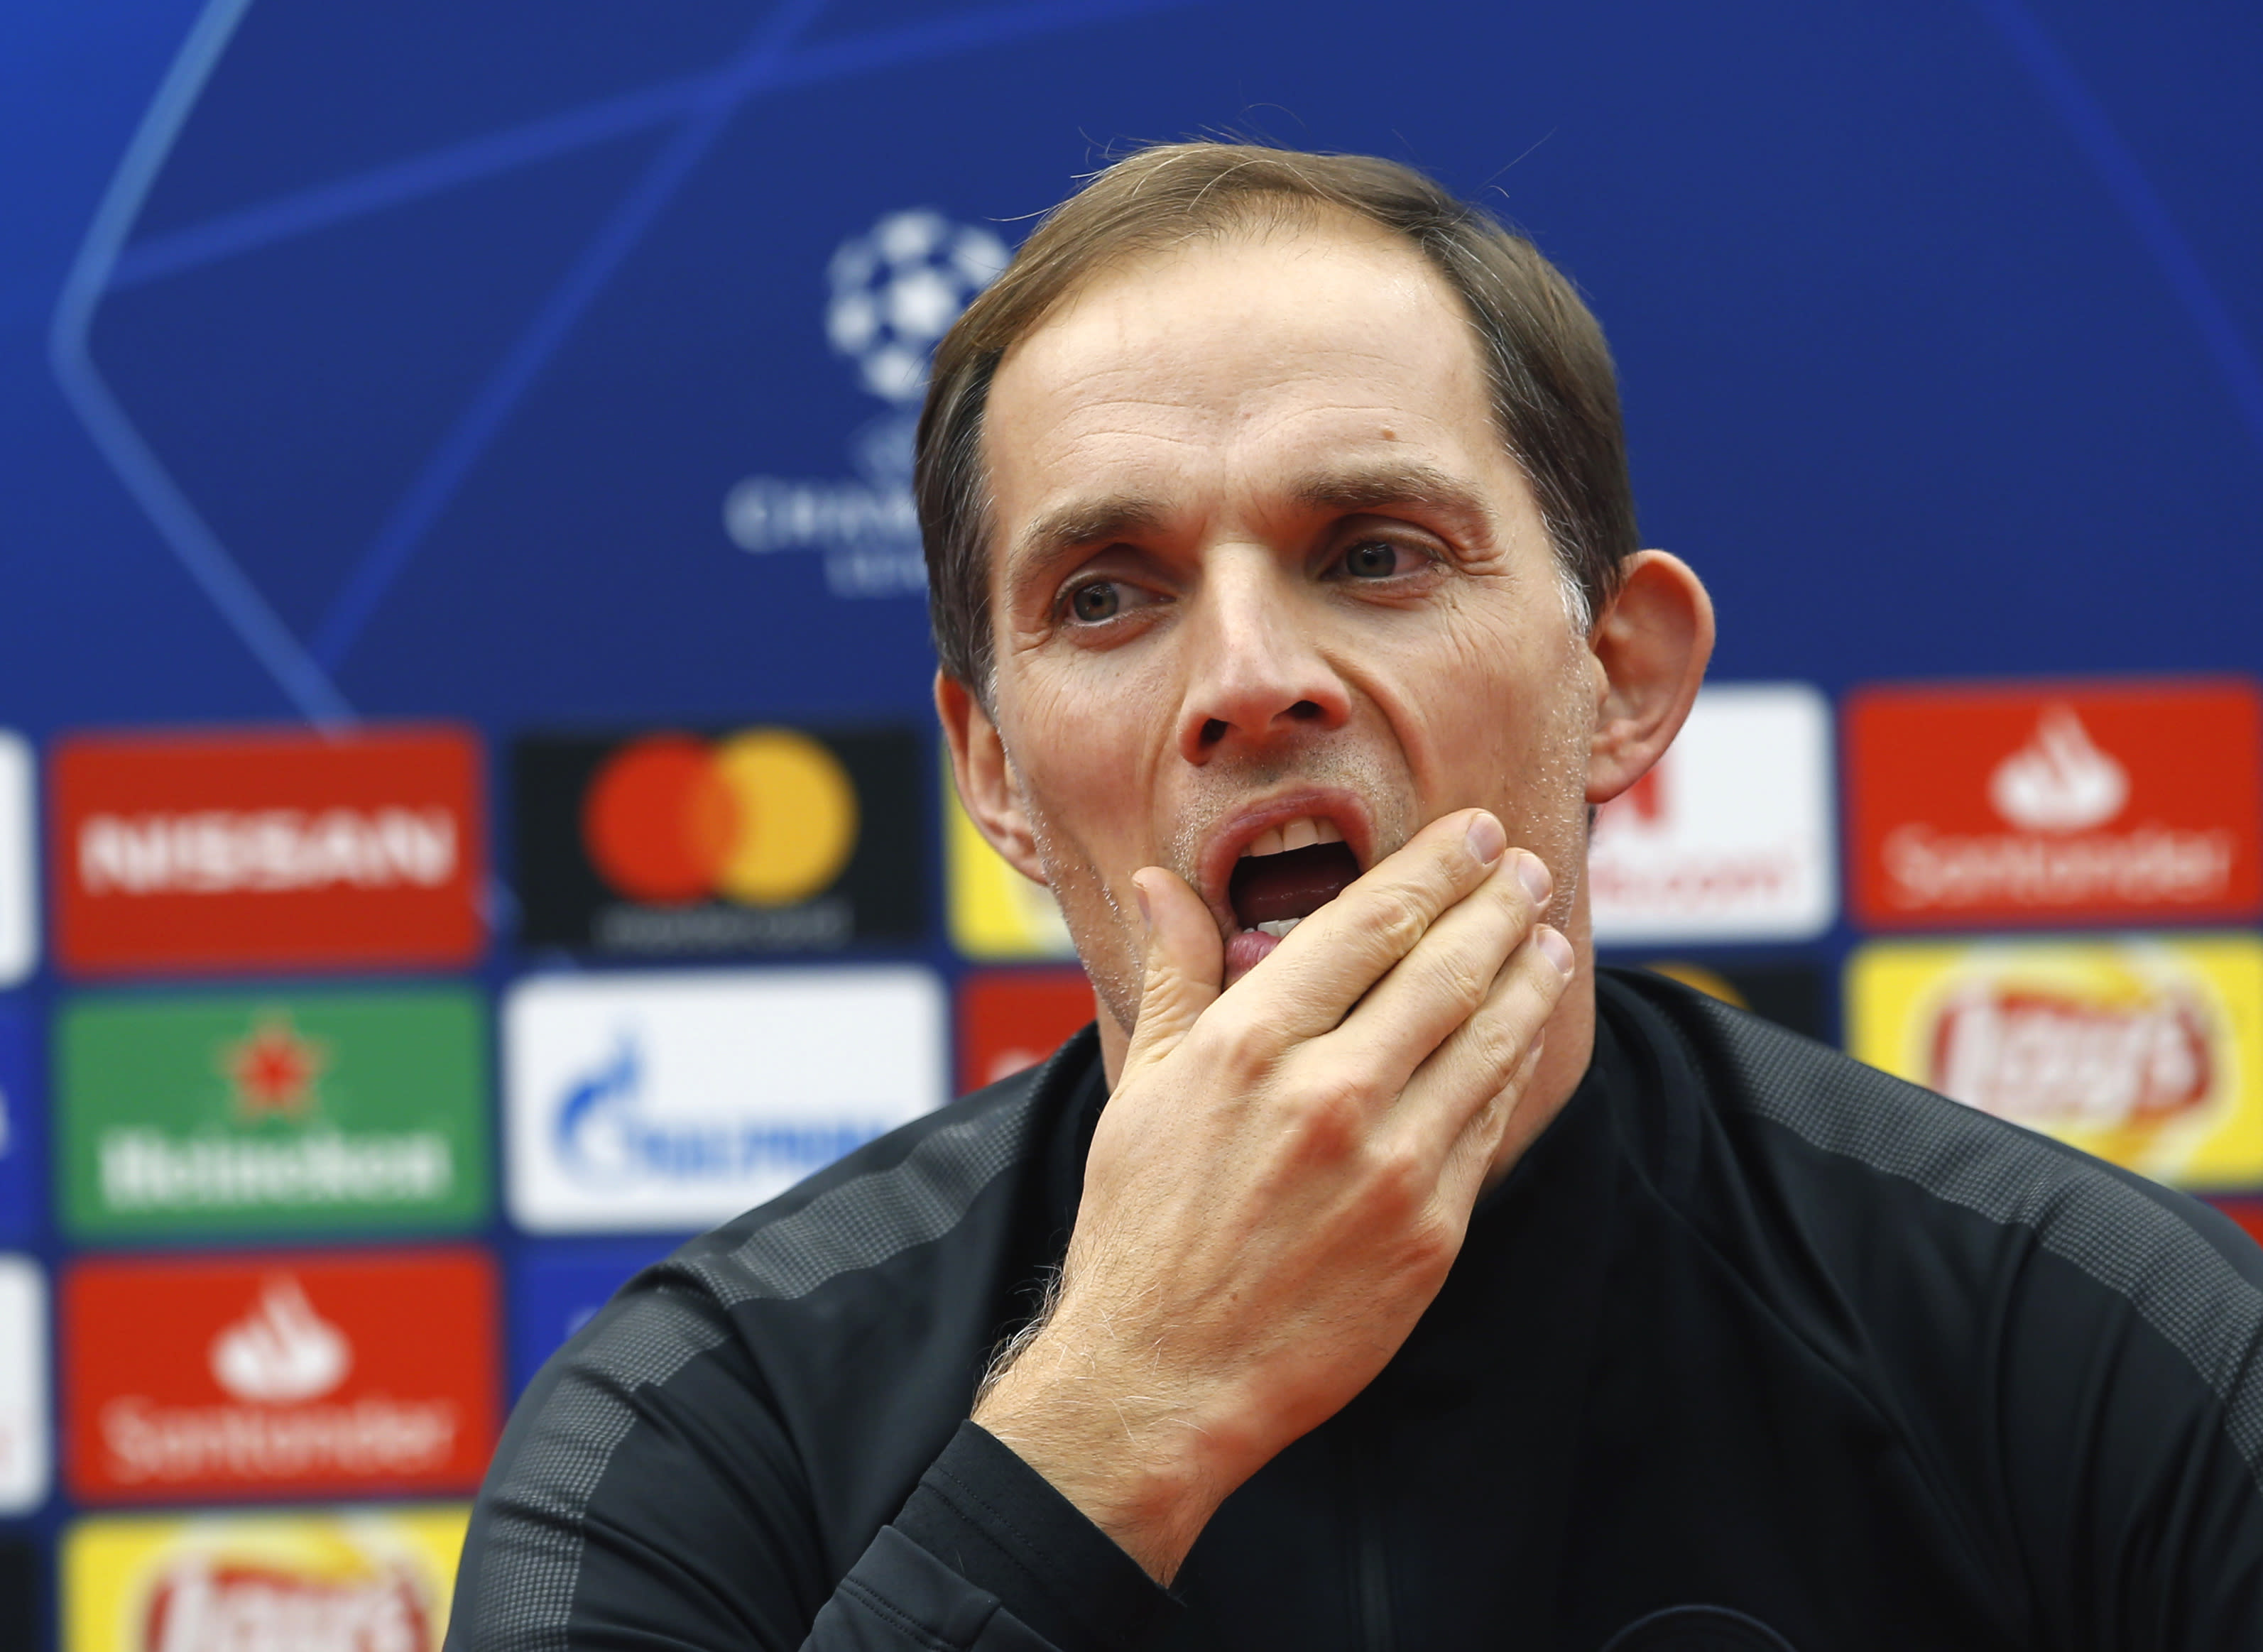 PSG coach Tuchel must deliver in Europe after domestic loss